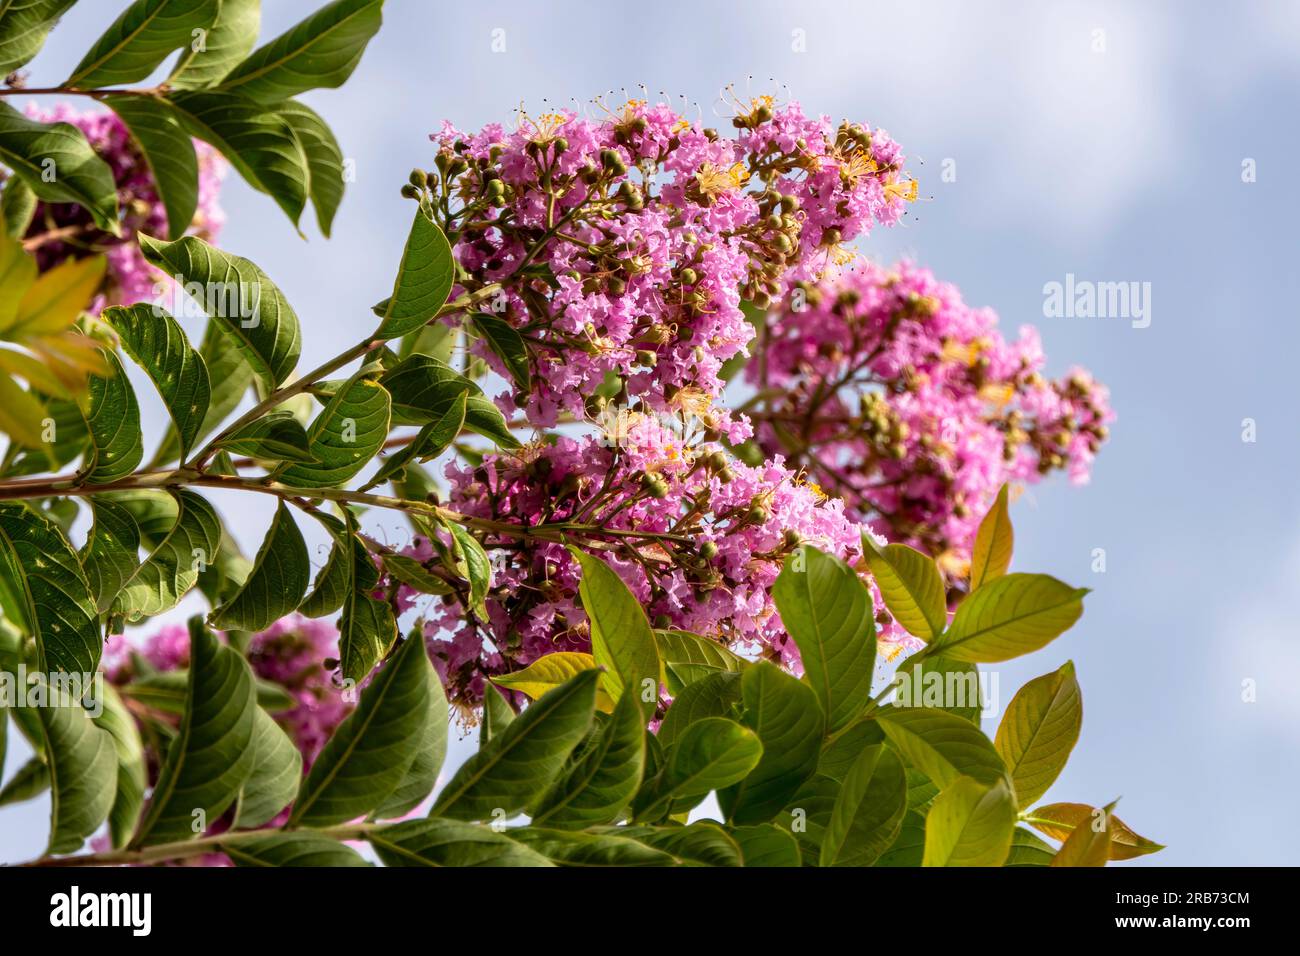 Brushes of pink flowers Crape Myrtle or Lagerstroemia close up on a blurred background Stock Photo